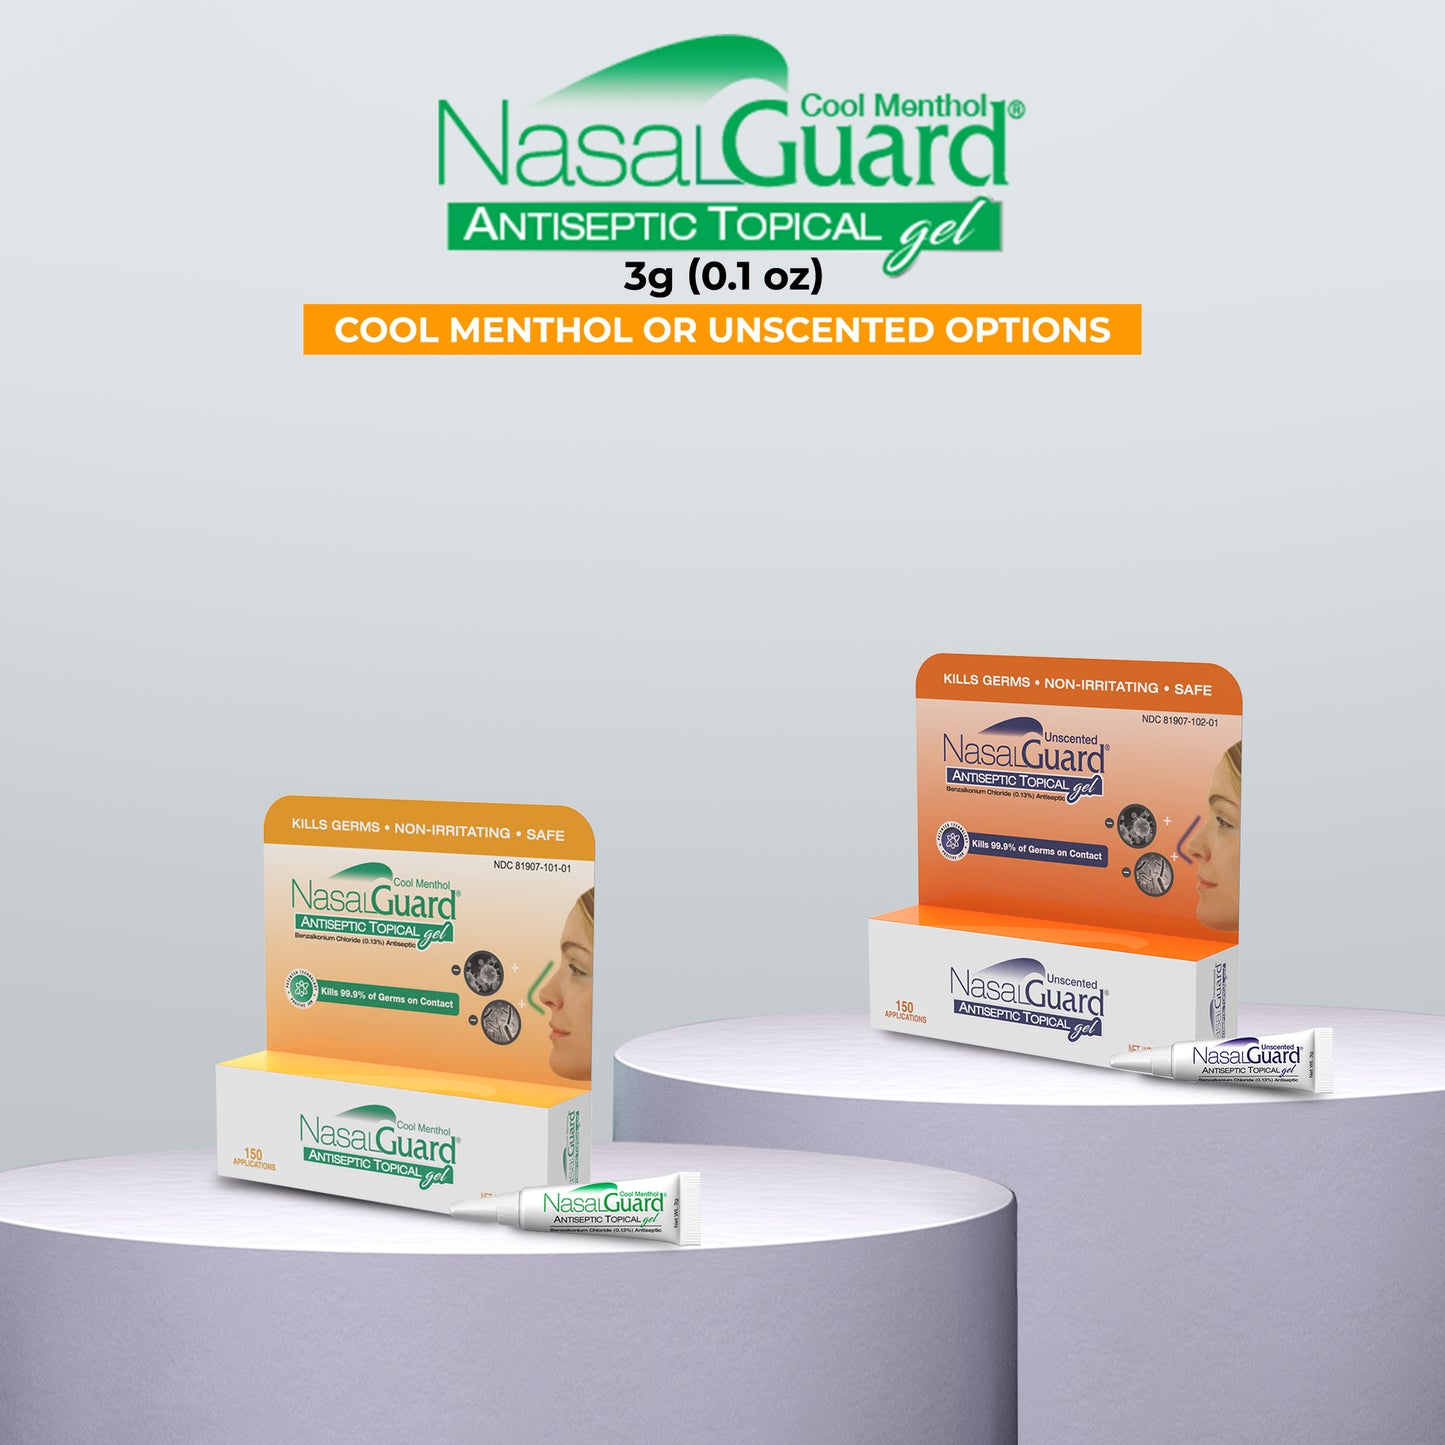 NasalGuard Antiseptic Topical Gel, Blocks & Kills 99.9% of Germs | Unscented | 3g Tube